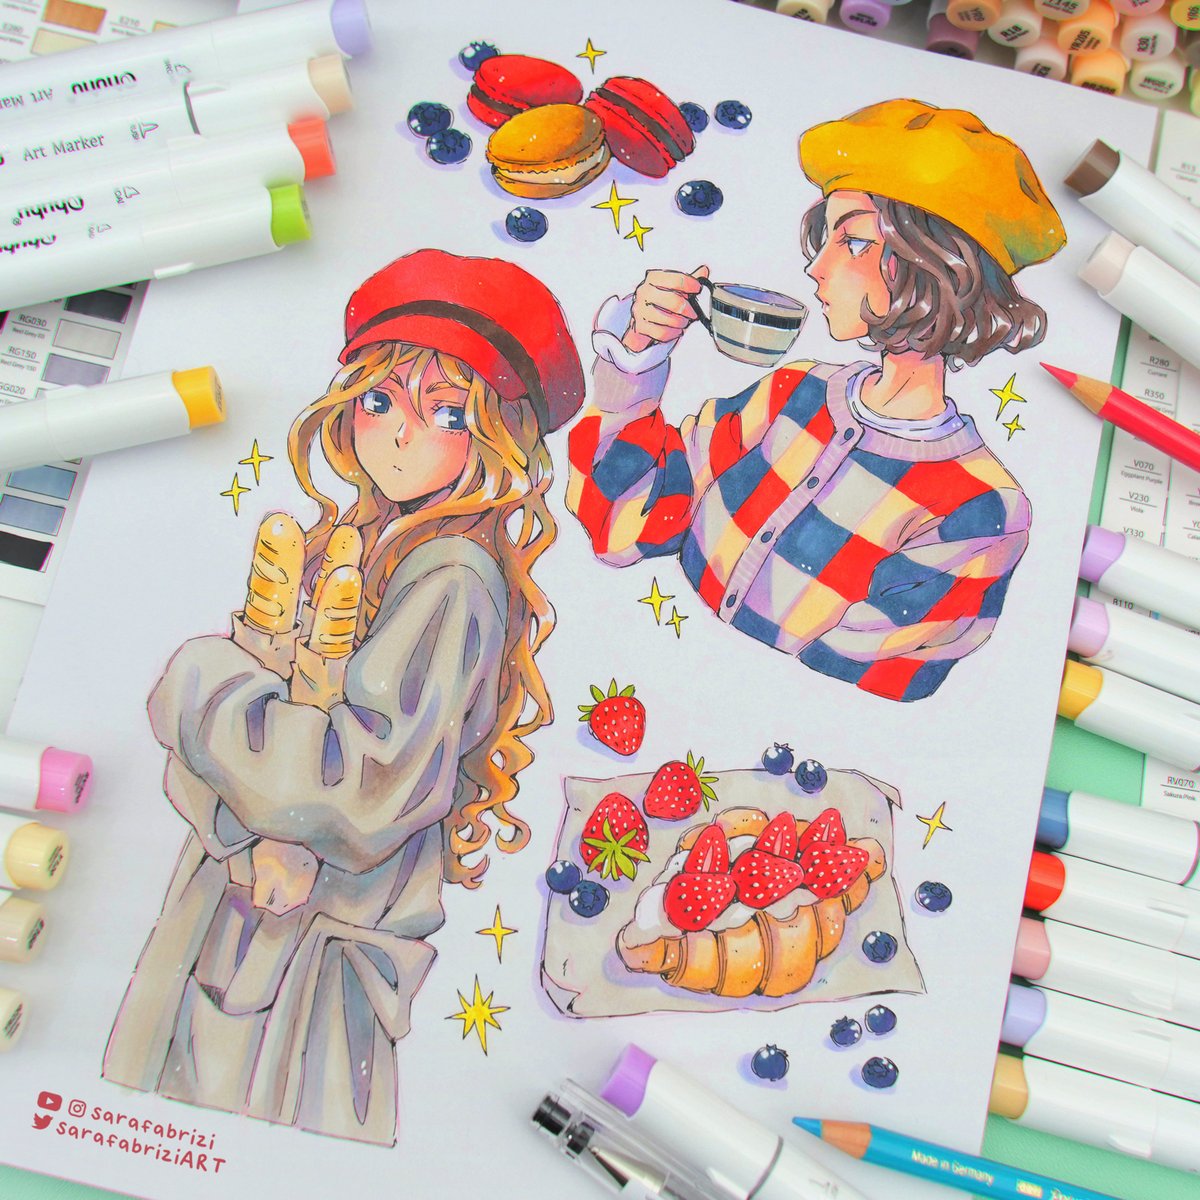 it's been a while since I colored with ohuhu markers, it was so much fun! ❤️ but drawing sweets makes me so hungry ! 😳🍰✨